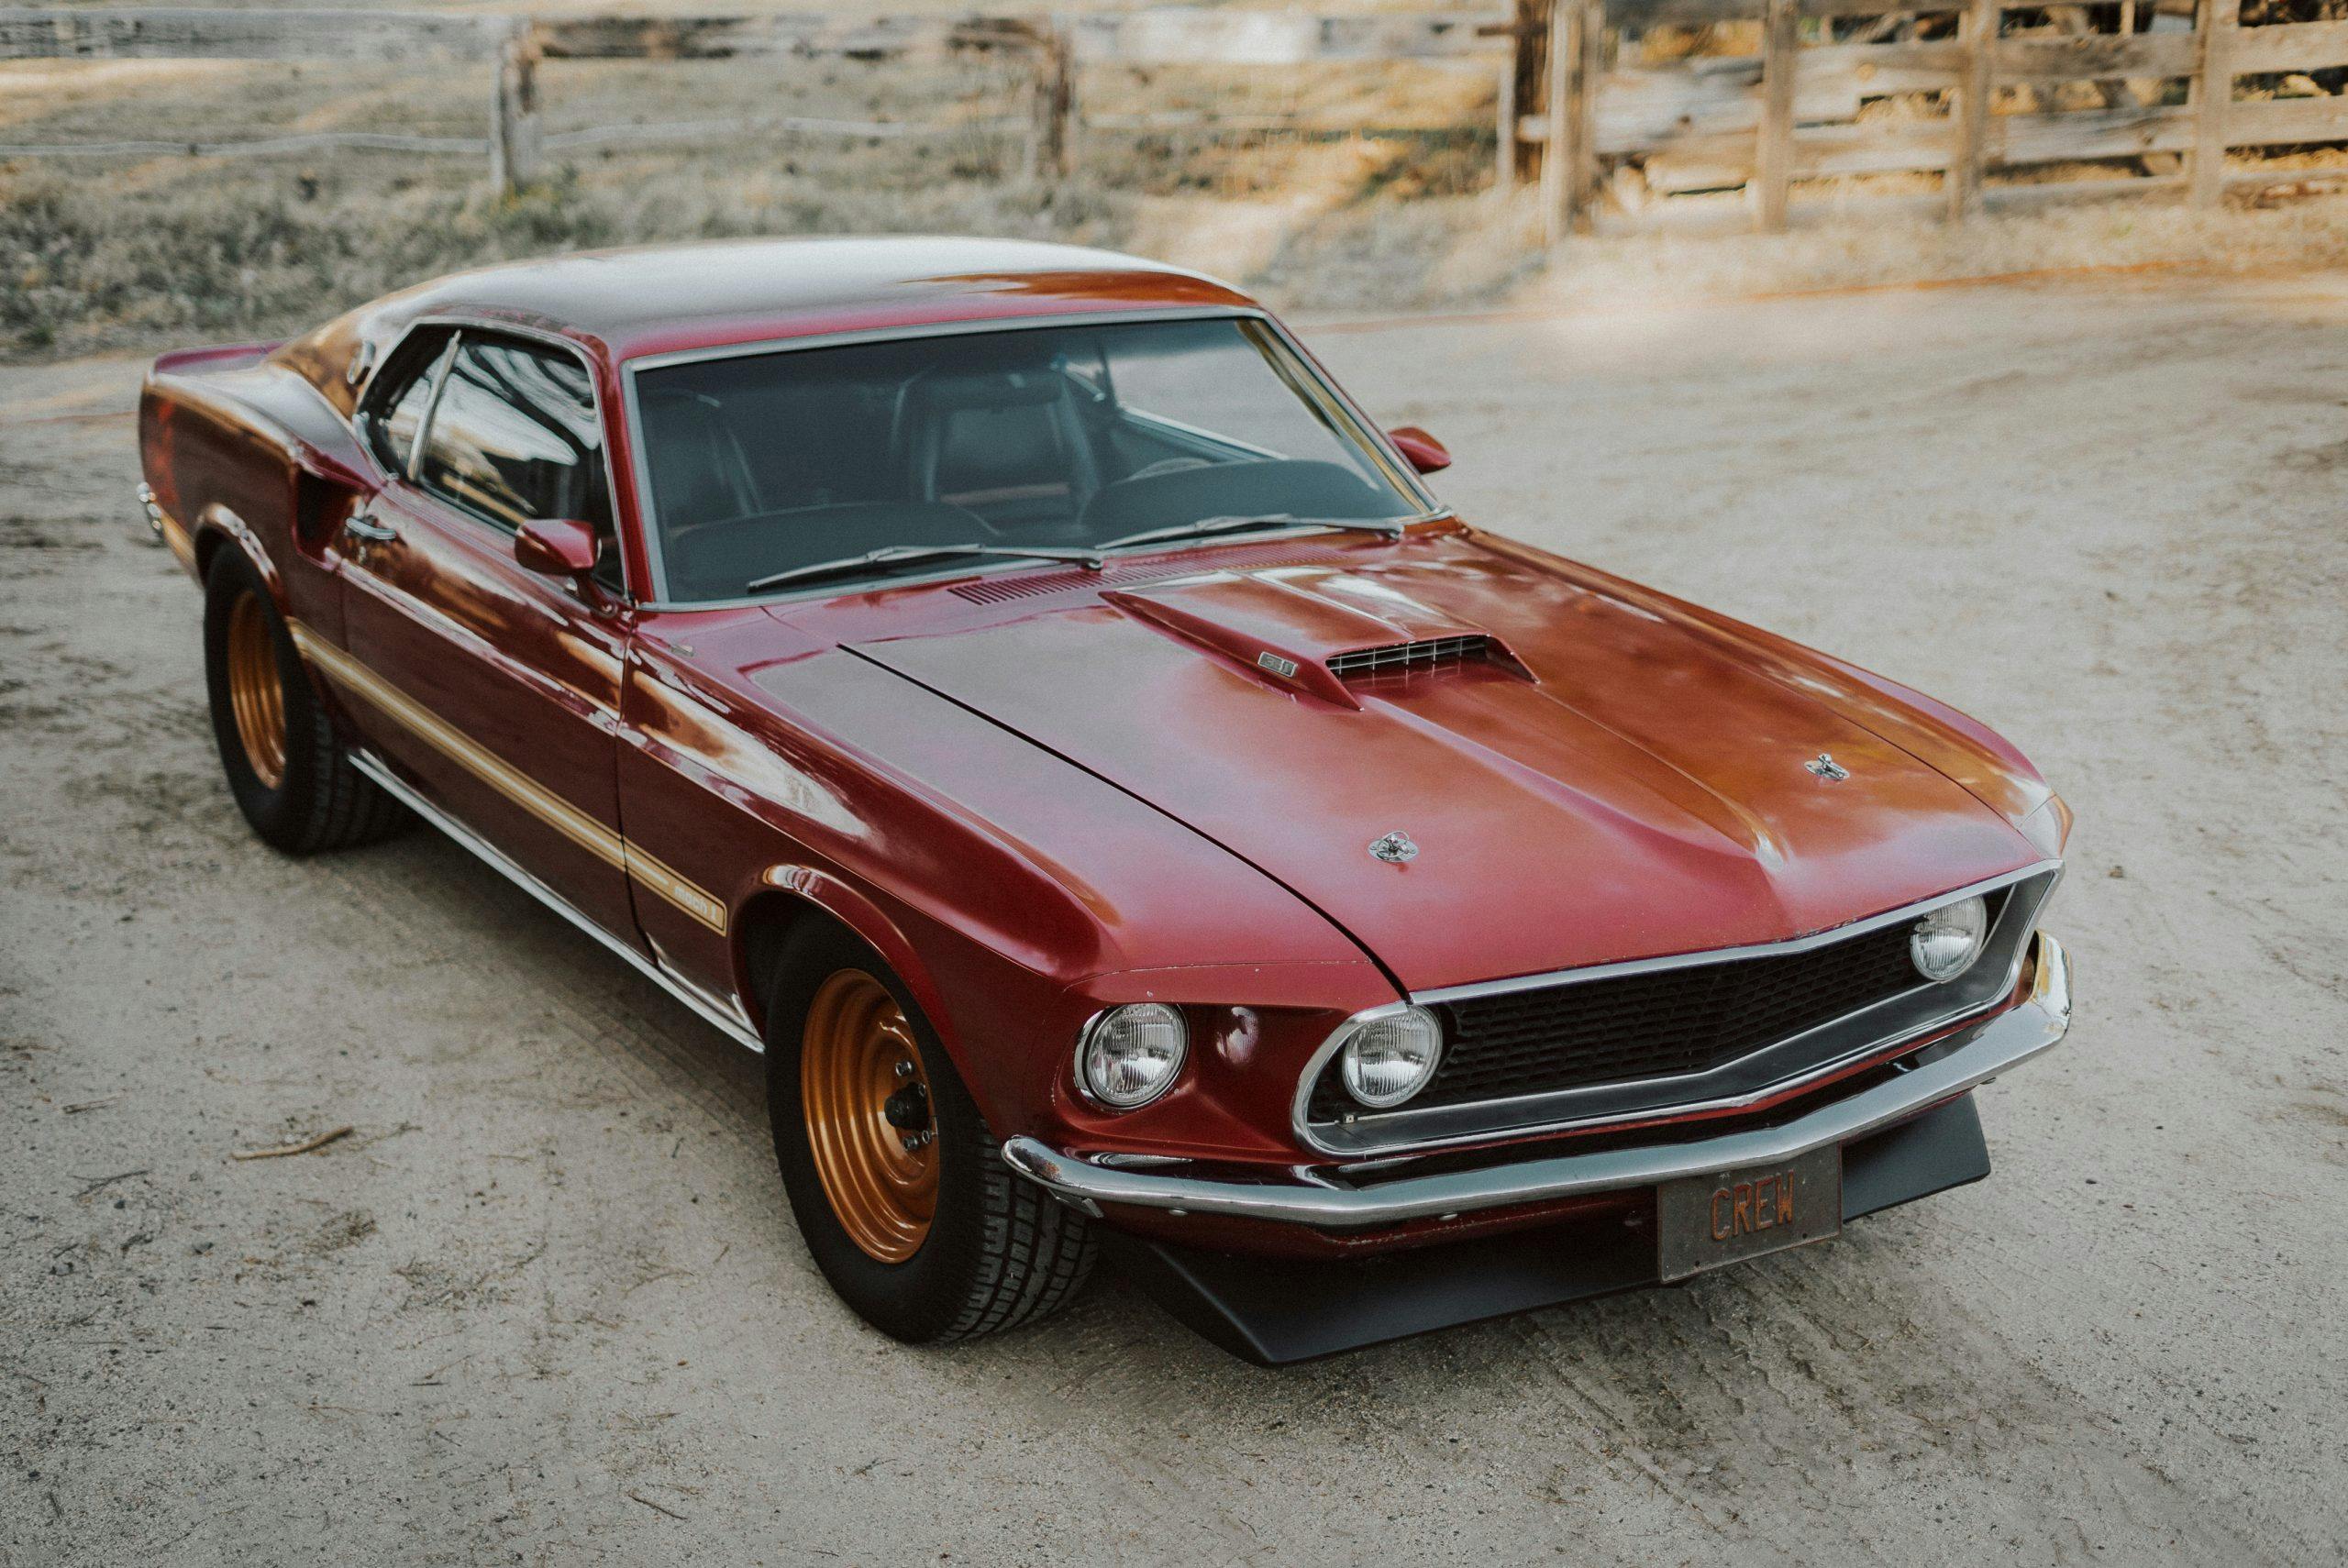 1969 Ford Mustang Mach 1 three quarter on dirt pull-off